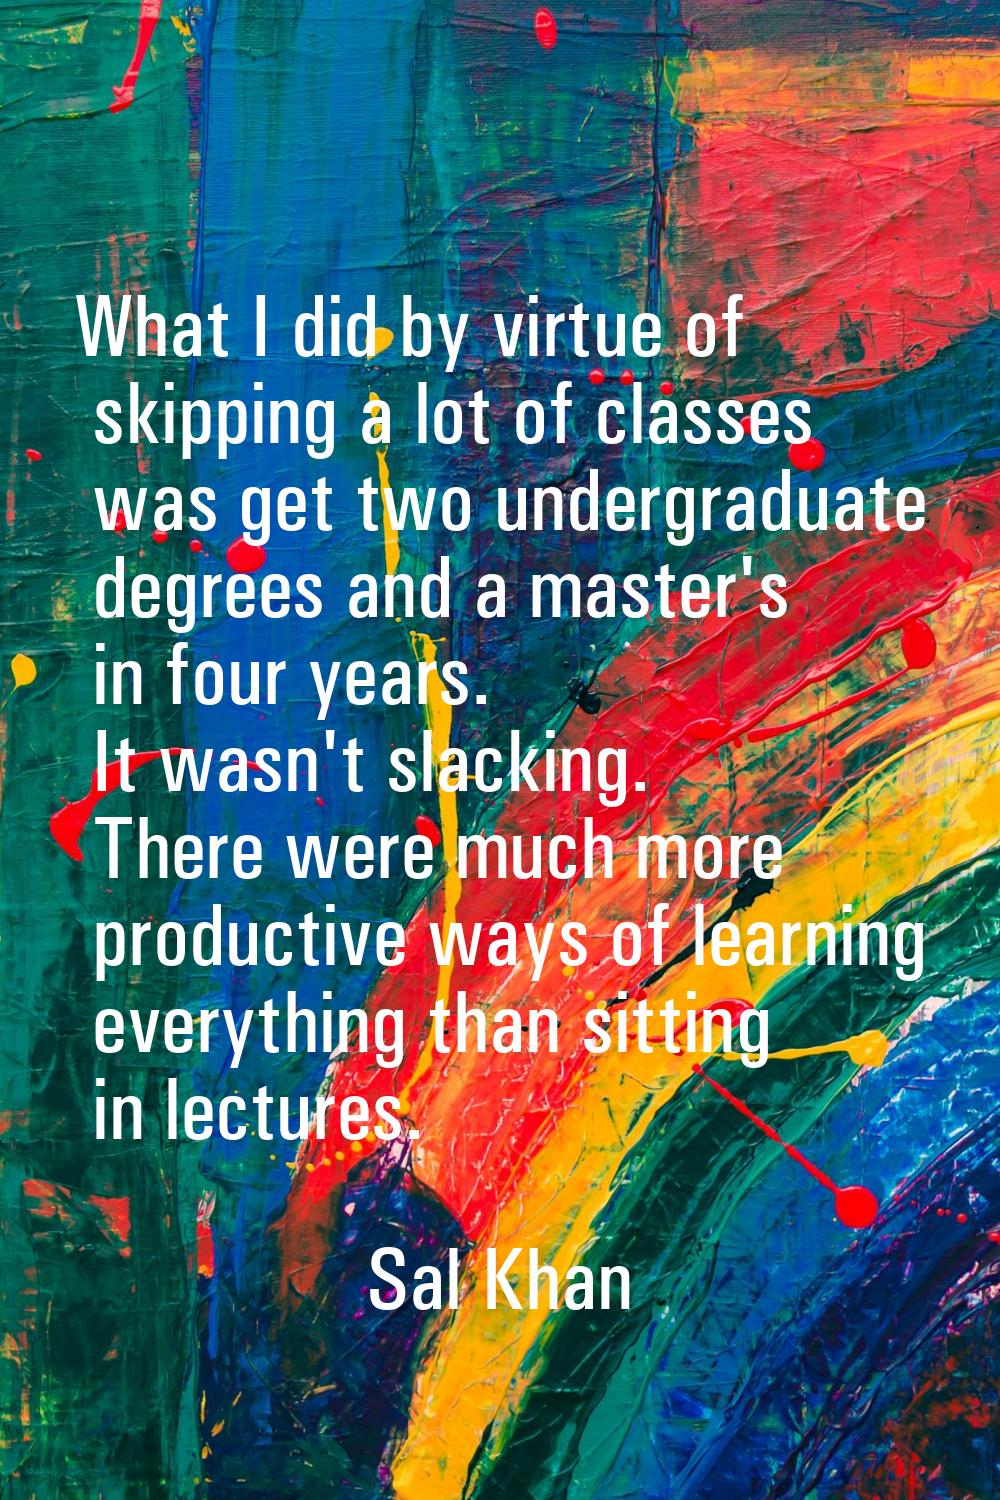 What I did by virtue of skipping a lot of classes was get two undergraduate degrees and a master's 